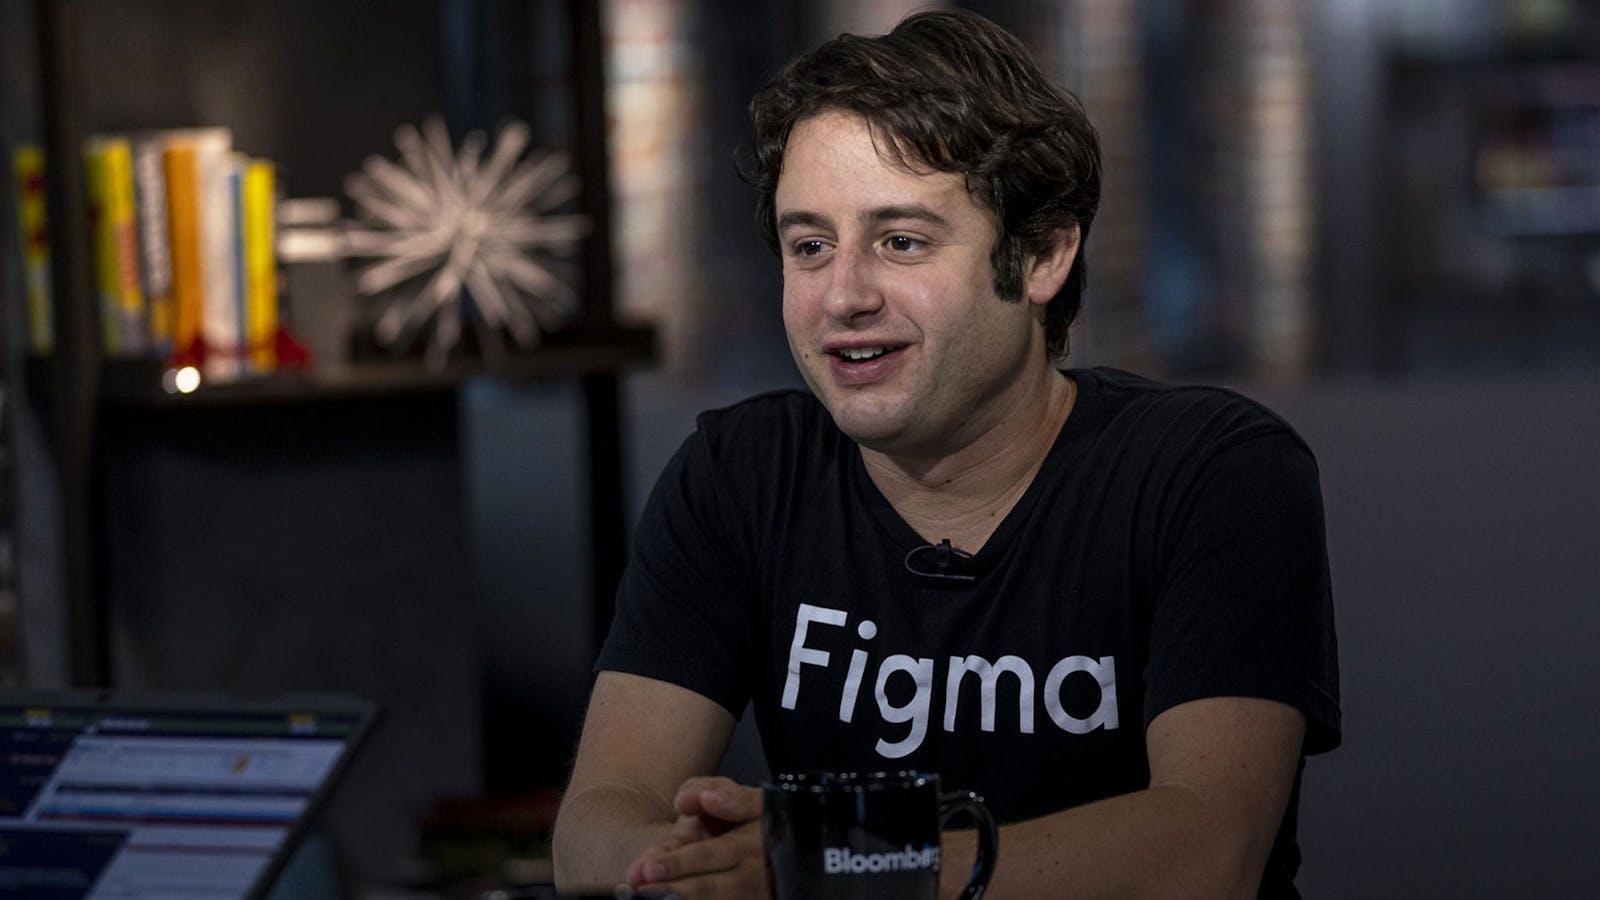 Here's Dylan Field, Figma CEO. Photo by Bloomberg.